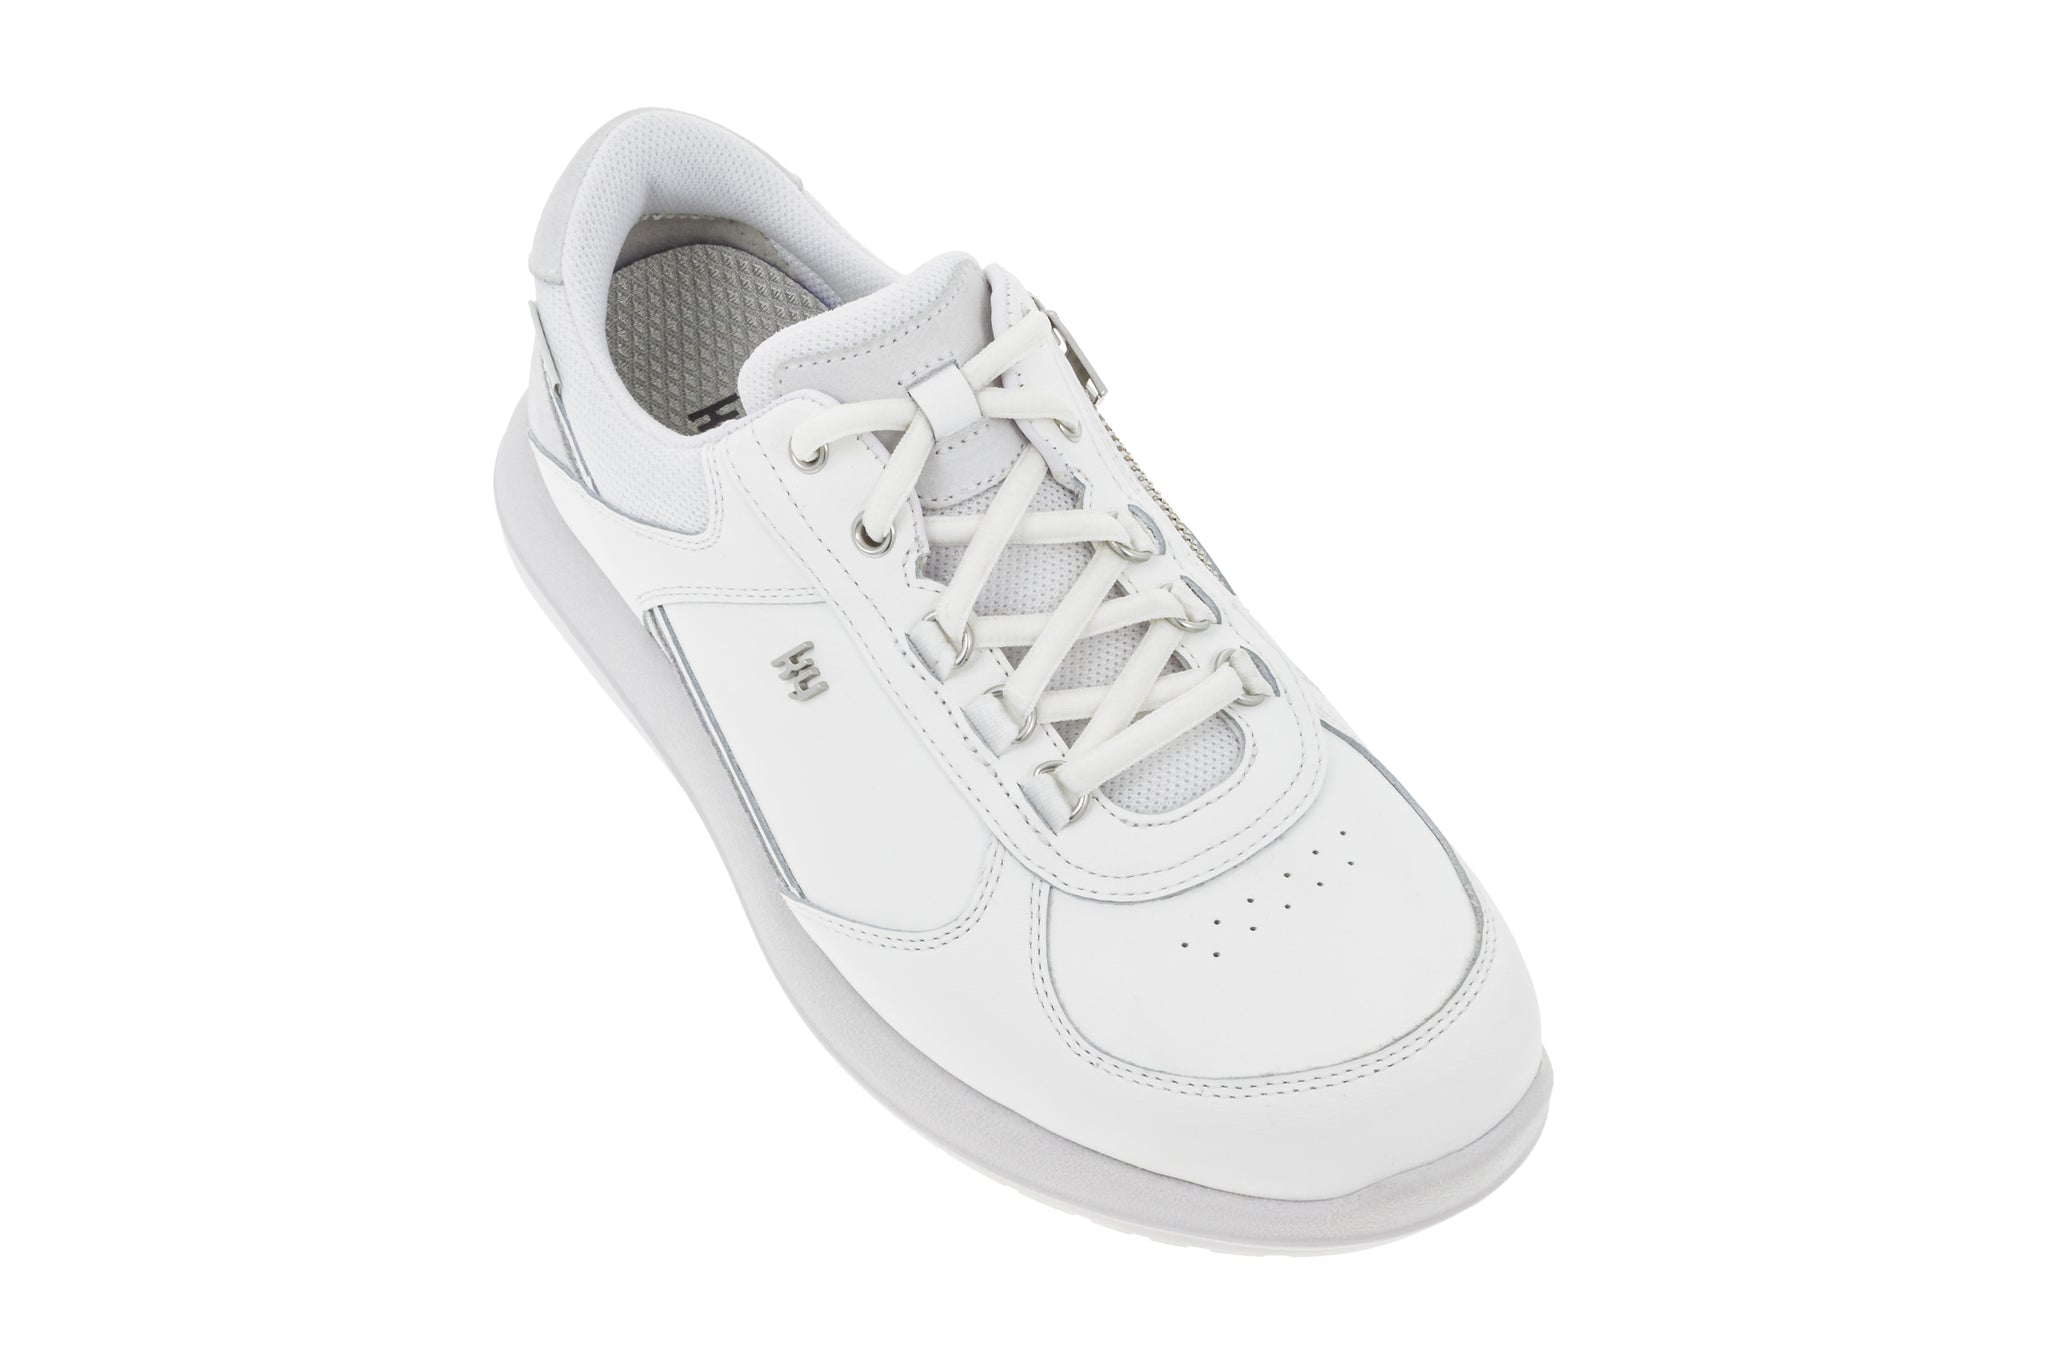 kybun Rolle White: Swiss Air-Cushion Shoe for Pain Relief – kybun online  store USA